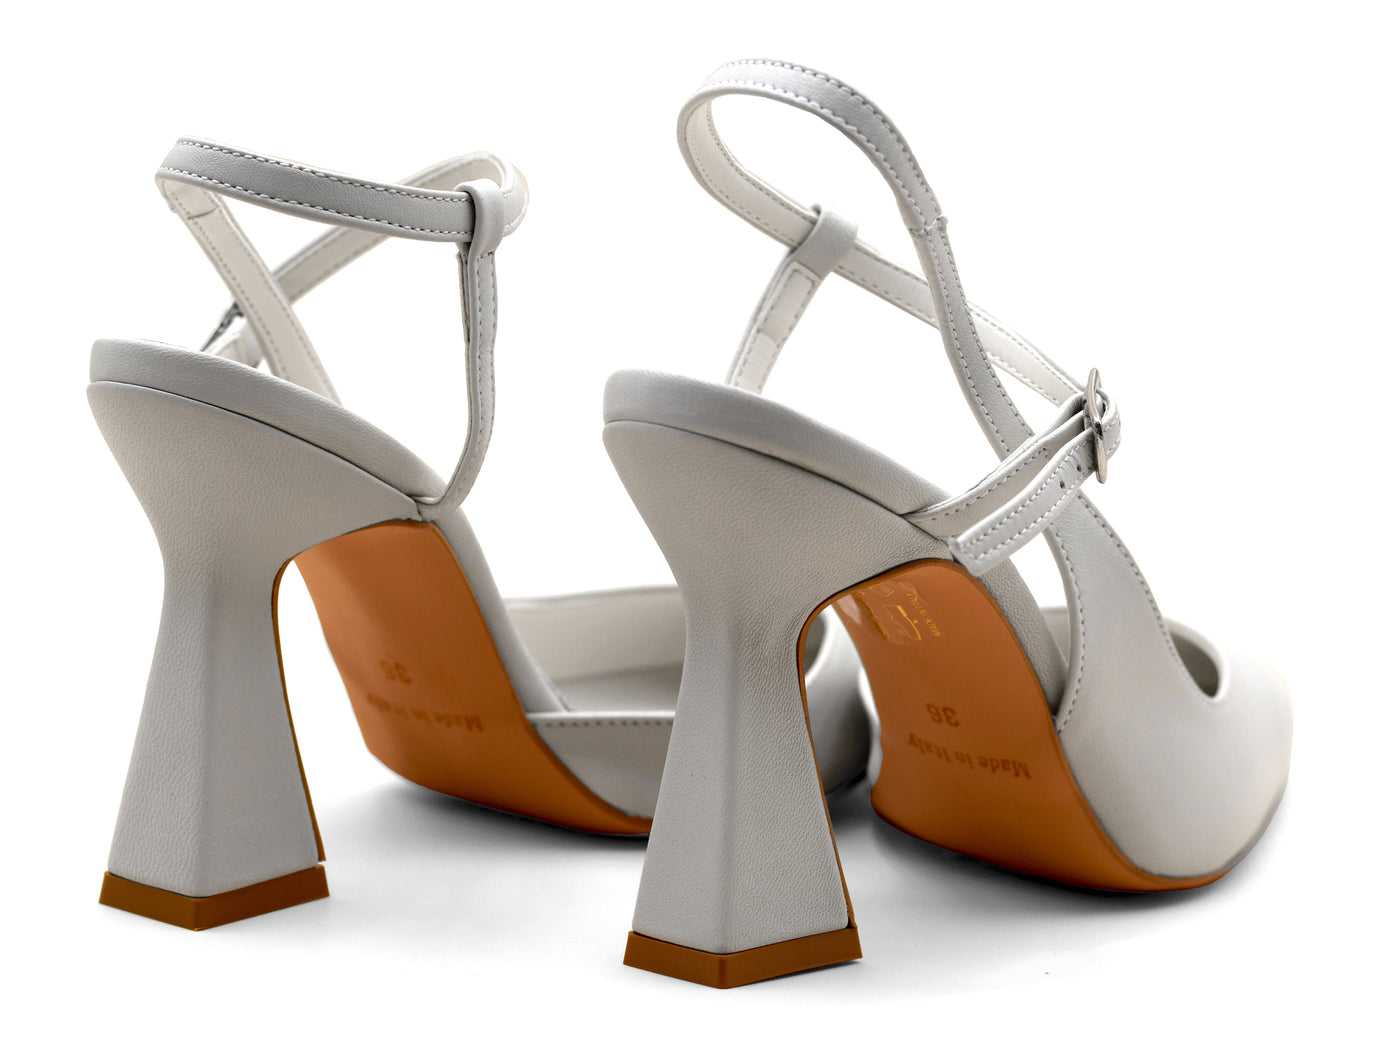 Women's shoes with asymmetrical heel